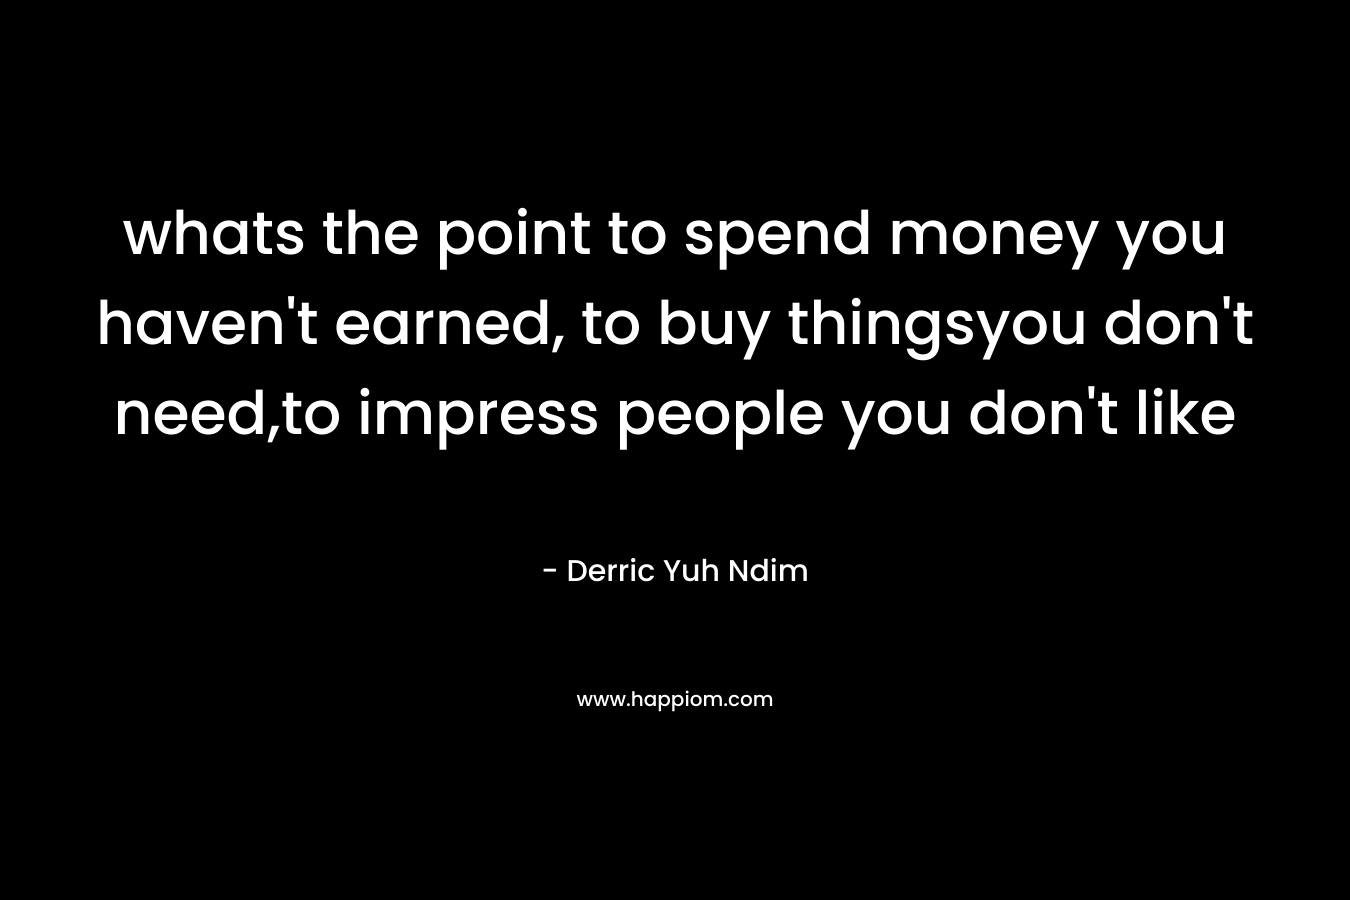 whats the point to spend money you haven't earned, to buy thingsyou don't need,to impress people you don't like